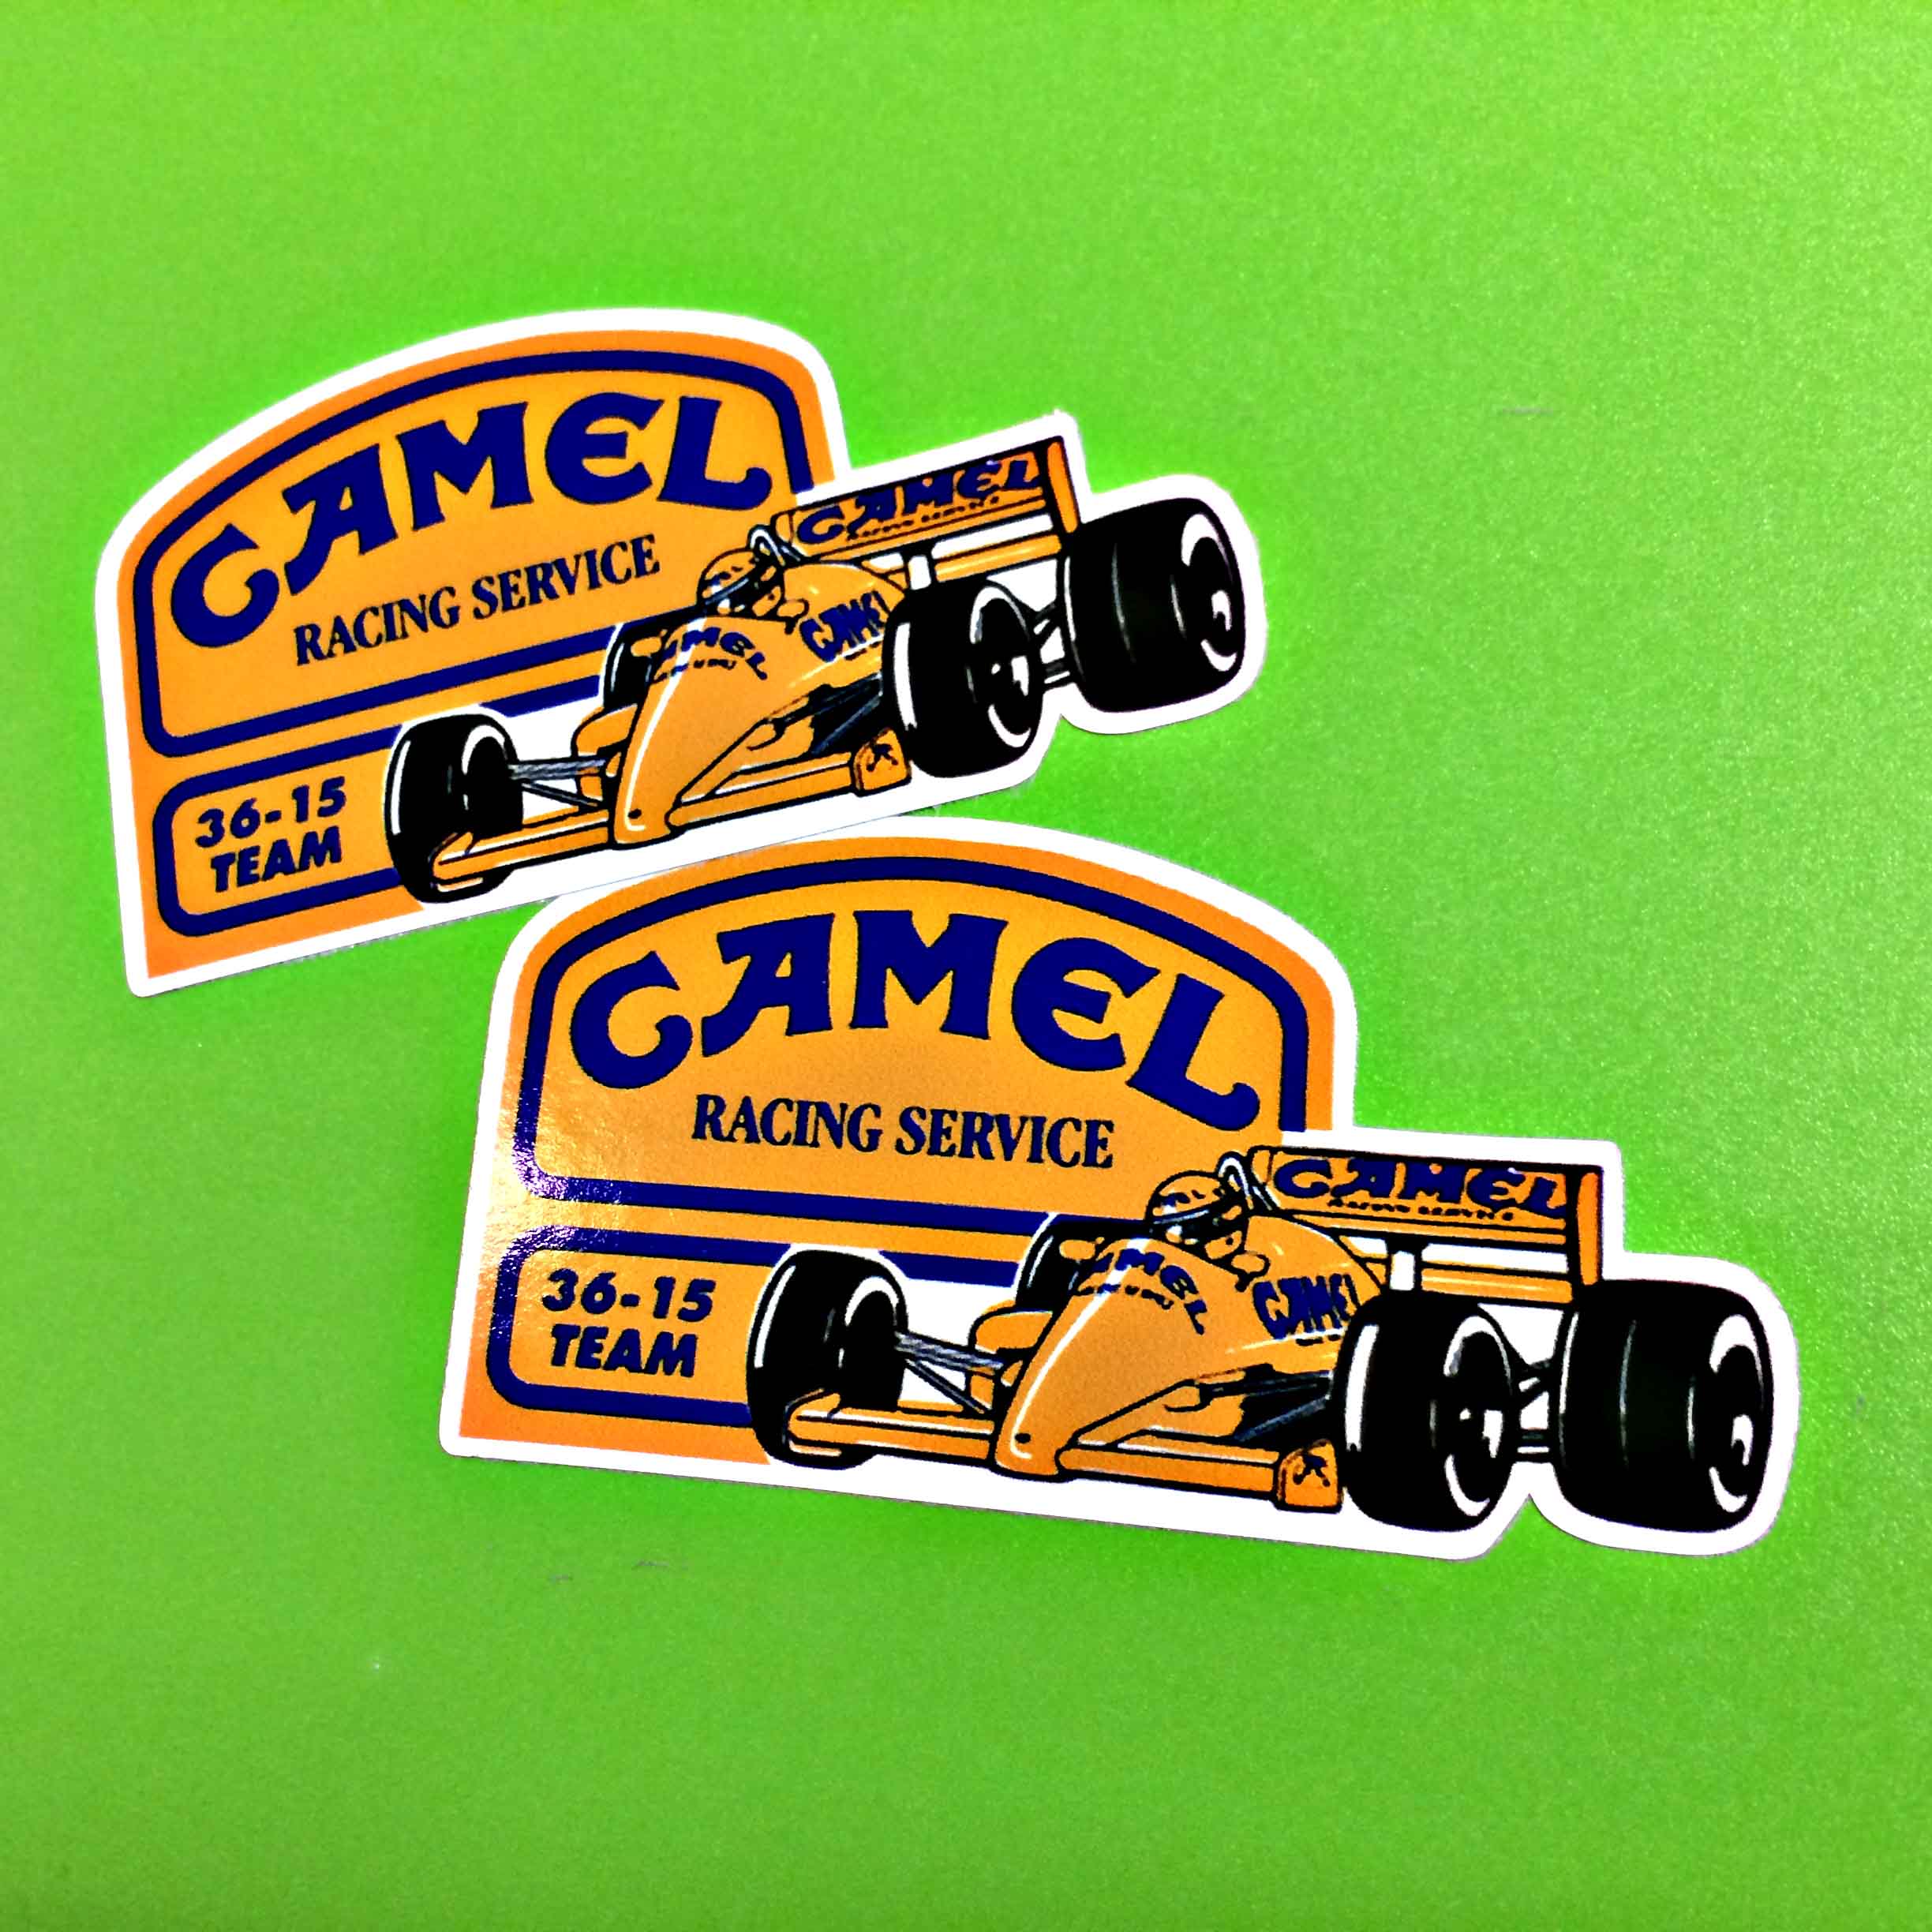 CAMEL RACING SERVICE F1. Camel Racing Service in blue lettering on a yellow background with a blue border; 36-15 Team in blue on a yellow background with a blue border next to a yellow F1 racing car with Camel logos on it in blue.